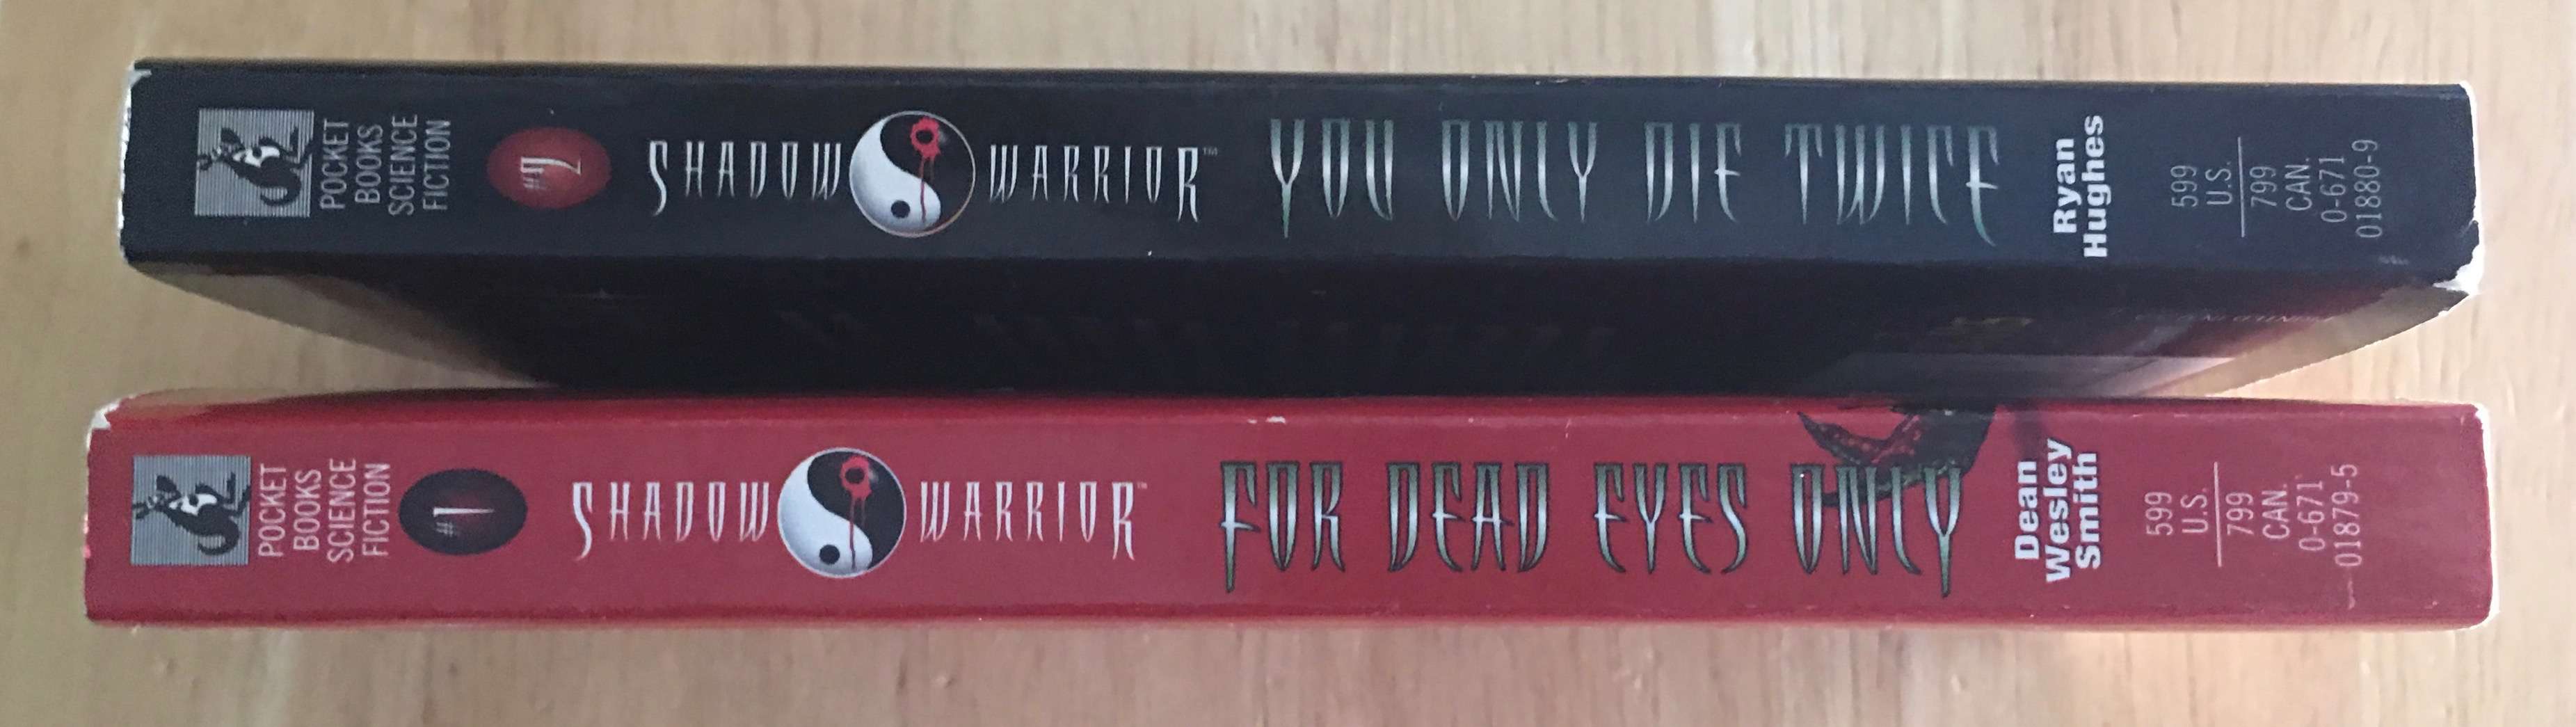 Shadow Warrior: For Dead Eyes Only : Dean Wesley Smith : Free